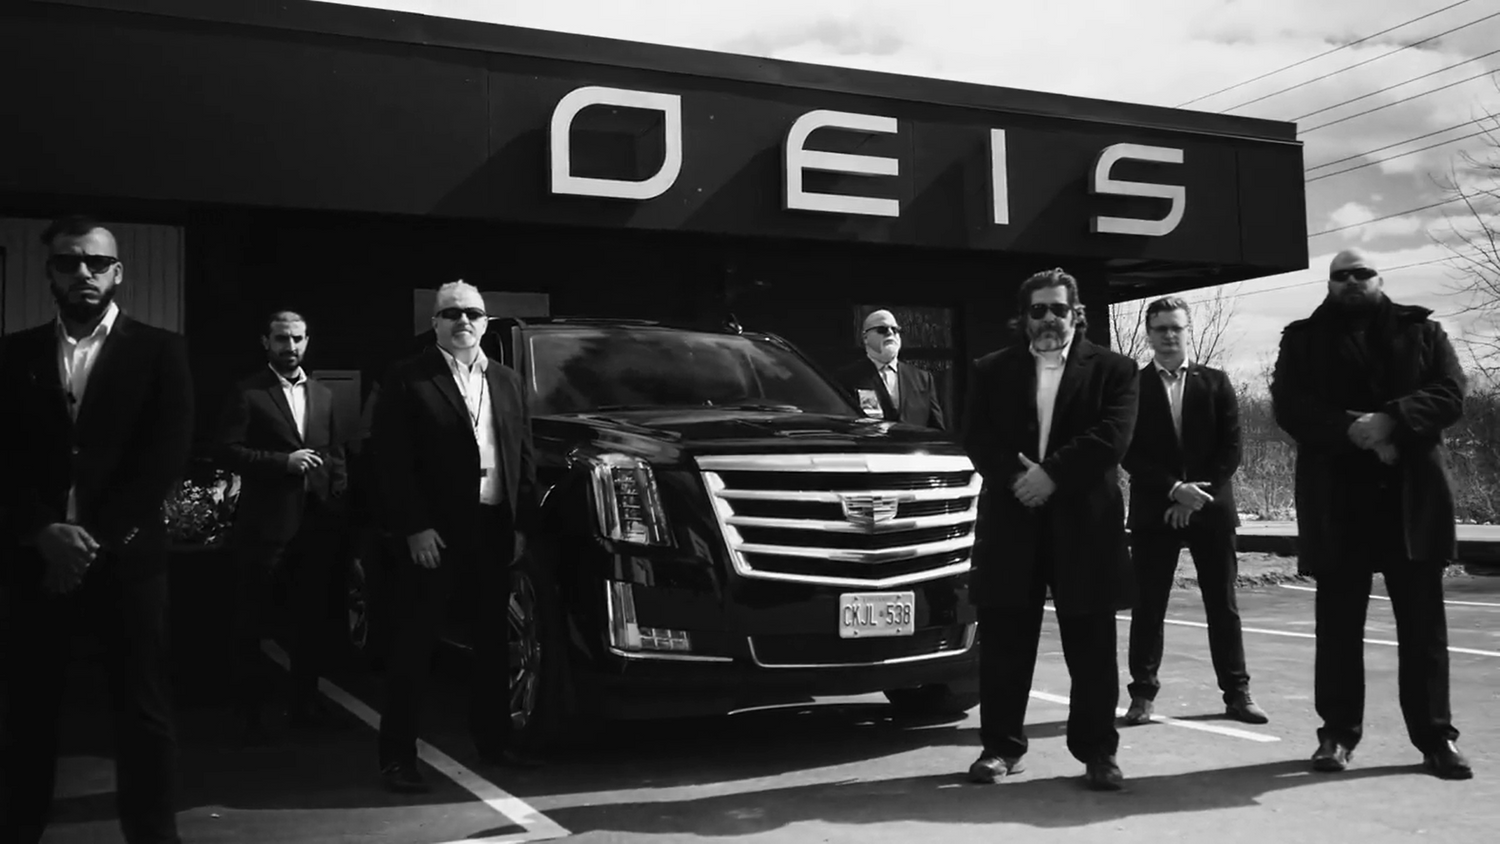 OEIS Private Investigations and Security team in black suits. They are standing at the Head Office Location in Niagara Falls with a fully equipped Black Cadillac. 